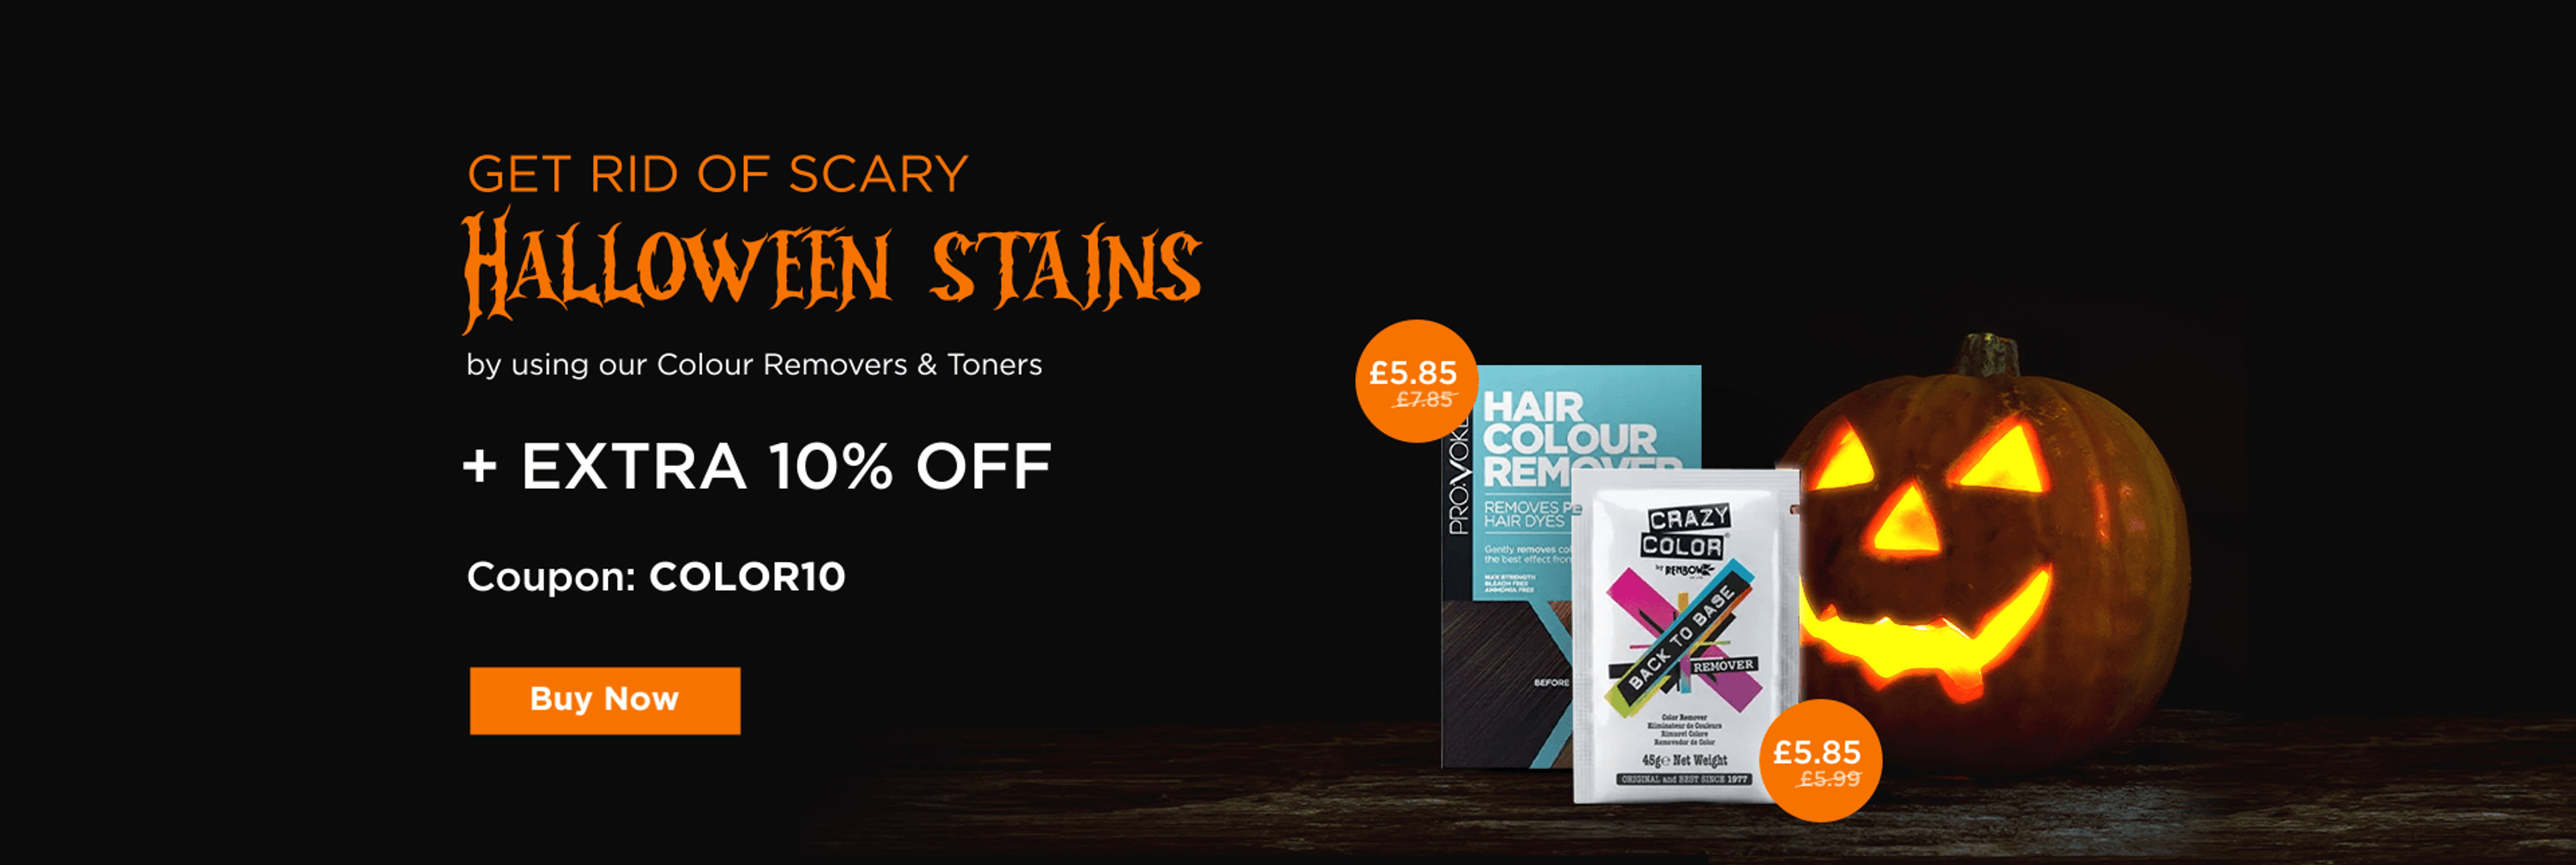 Get rid of scary Halloween stains by using our Colour Removers & Toners + extra 10% off using code